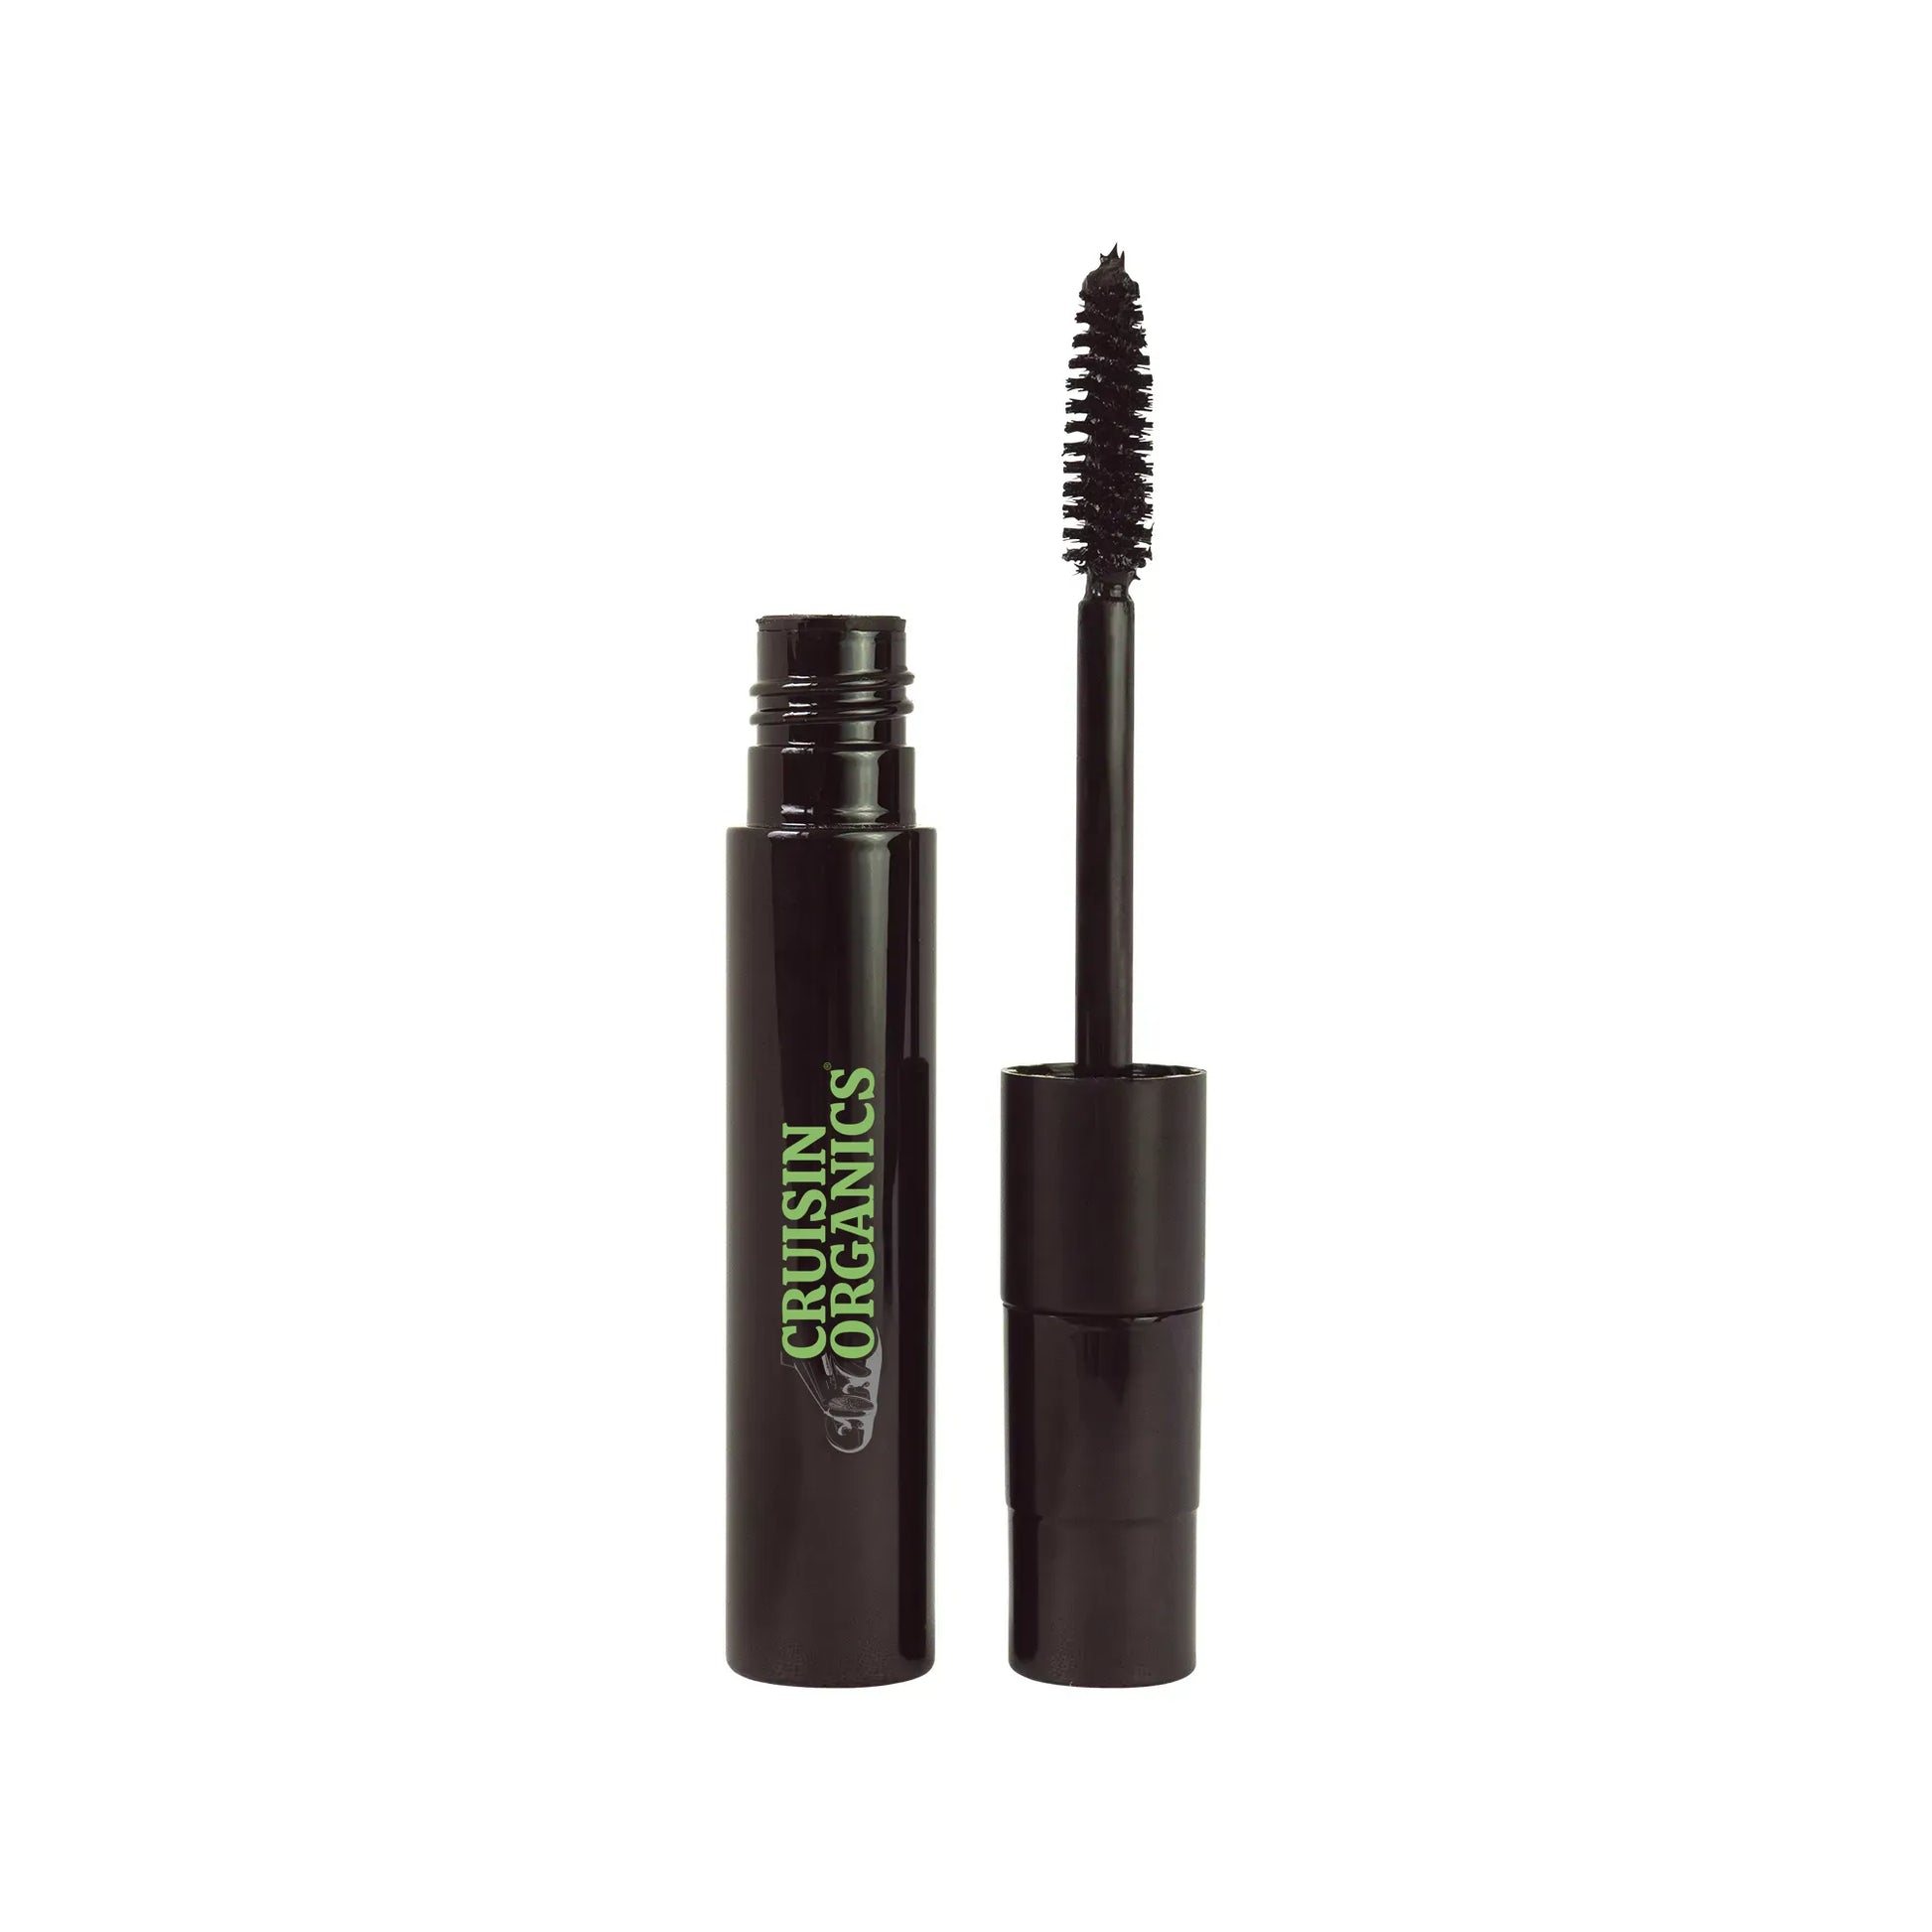 Cruisin Organics newly reformulated dual-lash mascara is here to give you the maximum volume for your beautiful lashes. There are two types of looks you can go for! Naturally defined lashes or a set of full-volume lashes. The larger wand provides full coverage on each lash, maximum volume and darkness you are looking for. The thinner wand gives you natural, wispy lashes to suit your mood and occasion. Our formula means no worries about smudging or flaking throughout the day.